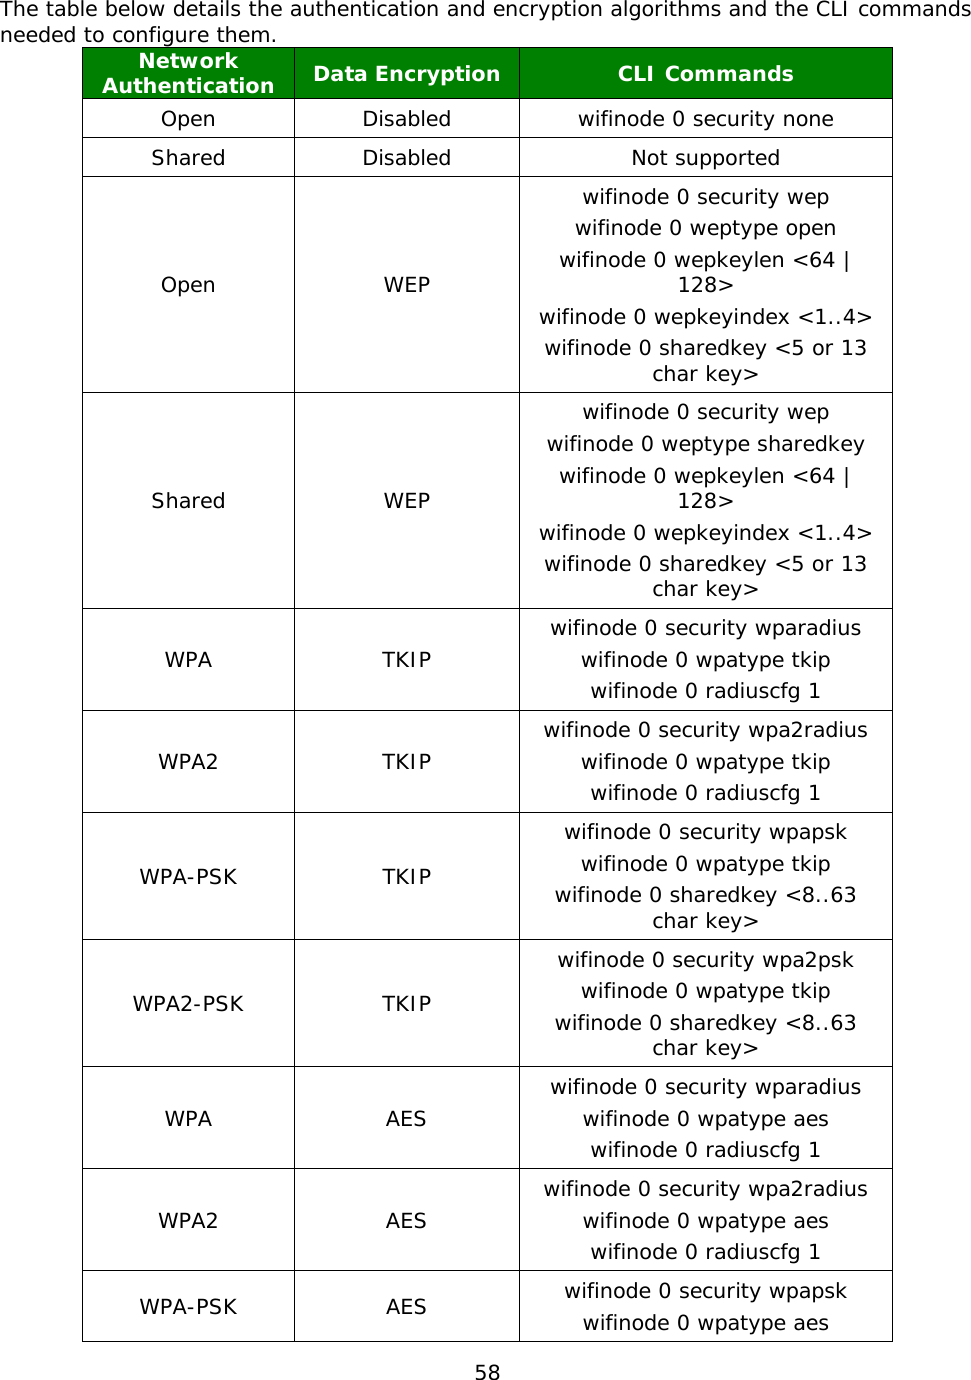 58  The table below details the authentication and encryption algorithms and the CLI commands needed to configure them. Network Authentication Data Encryption  CLI Commands Open Disabled wifinode 0 security none Shared Disabled Not supported Open WEP wifinode 0 security wep wifinode 0 weptype open wifinode 0 wepkeylen &lt;64 | 128&gt; wifinode 0 wepkeyindex &lt;1..4&gt; wifinode 0 sharedkey &lt;5 or 13 char key&gt; Shared WEP wifinode 0 security wep wifinode 0 weptype sharedkey wifinode 0 wepkeylen &lt;64 | 128&gt; wifinode 0 wepkeyindex &lt;1..4&gt; wifinode 0 sharedkey &lt;5 or 13 char key&gt; WPA TKIP wifinode 0 security wparadius wifinode 0 wpatype tkip wifinode 0 radiuscfg 1 WPA2 TKIP wifinode 0 security wpa2radius wifinode 0 wpatype tkip wifinode 0 radiuscfg 1 WPA-PSK TKIP wifinode 0 security wpapsk wifinode 0 wpatype tkip wifinode 0 sharedkey &lt;8..63 char key&gt; WPA2-PSK TKIP wifinode 0 security wpa2psk wifinode 0 wpatype tkip wifinode 0 sharedkey &lt;8..63 char key&gt; WPA AES wifinode 0 security wparadius wifinode 0 wpatype aes wifinode 0 radiuscfg 1 WPA2 AES wifinode 0 security wpa2radius wifinode 0 wpatype aes wifinode 0 radiuscfg 1 WPA-PSK AES wifinode 0 security wpapsk wifinode 0 wpatype aes 